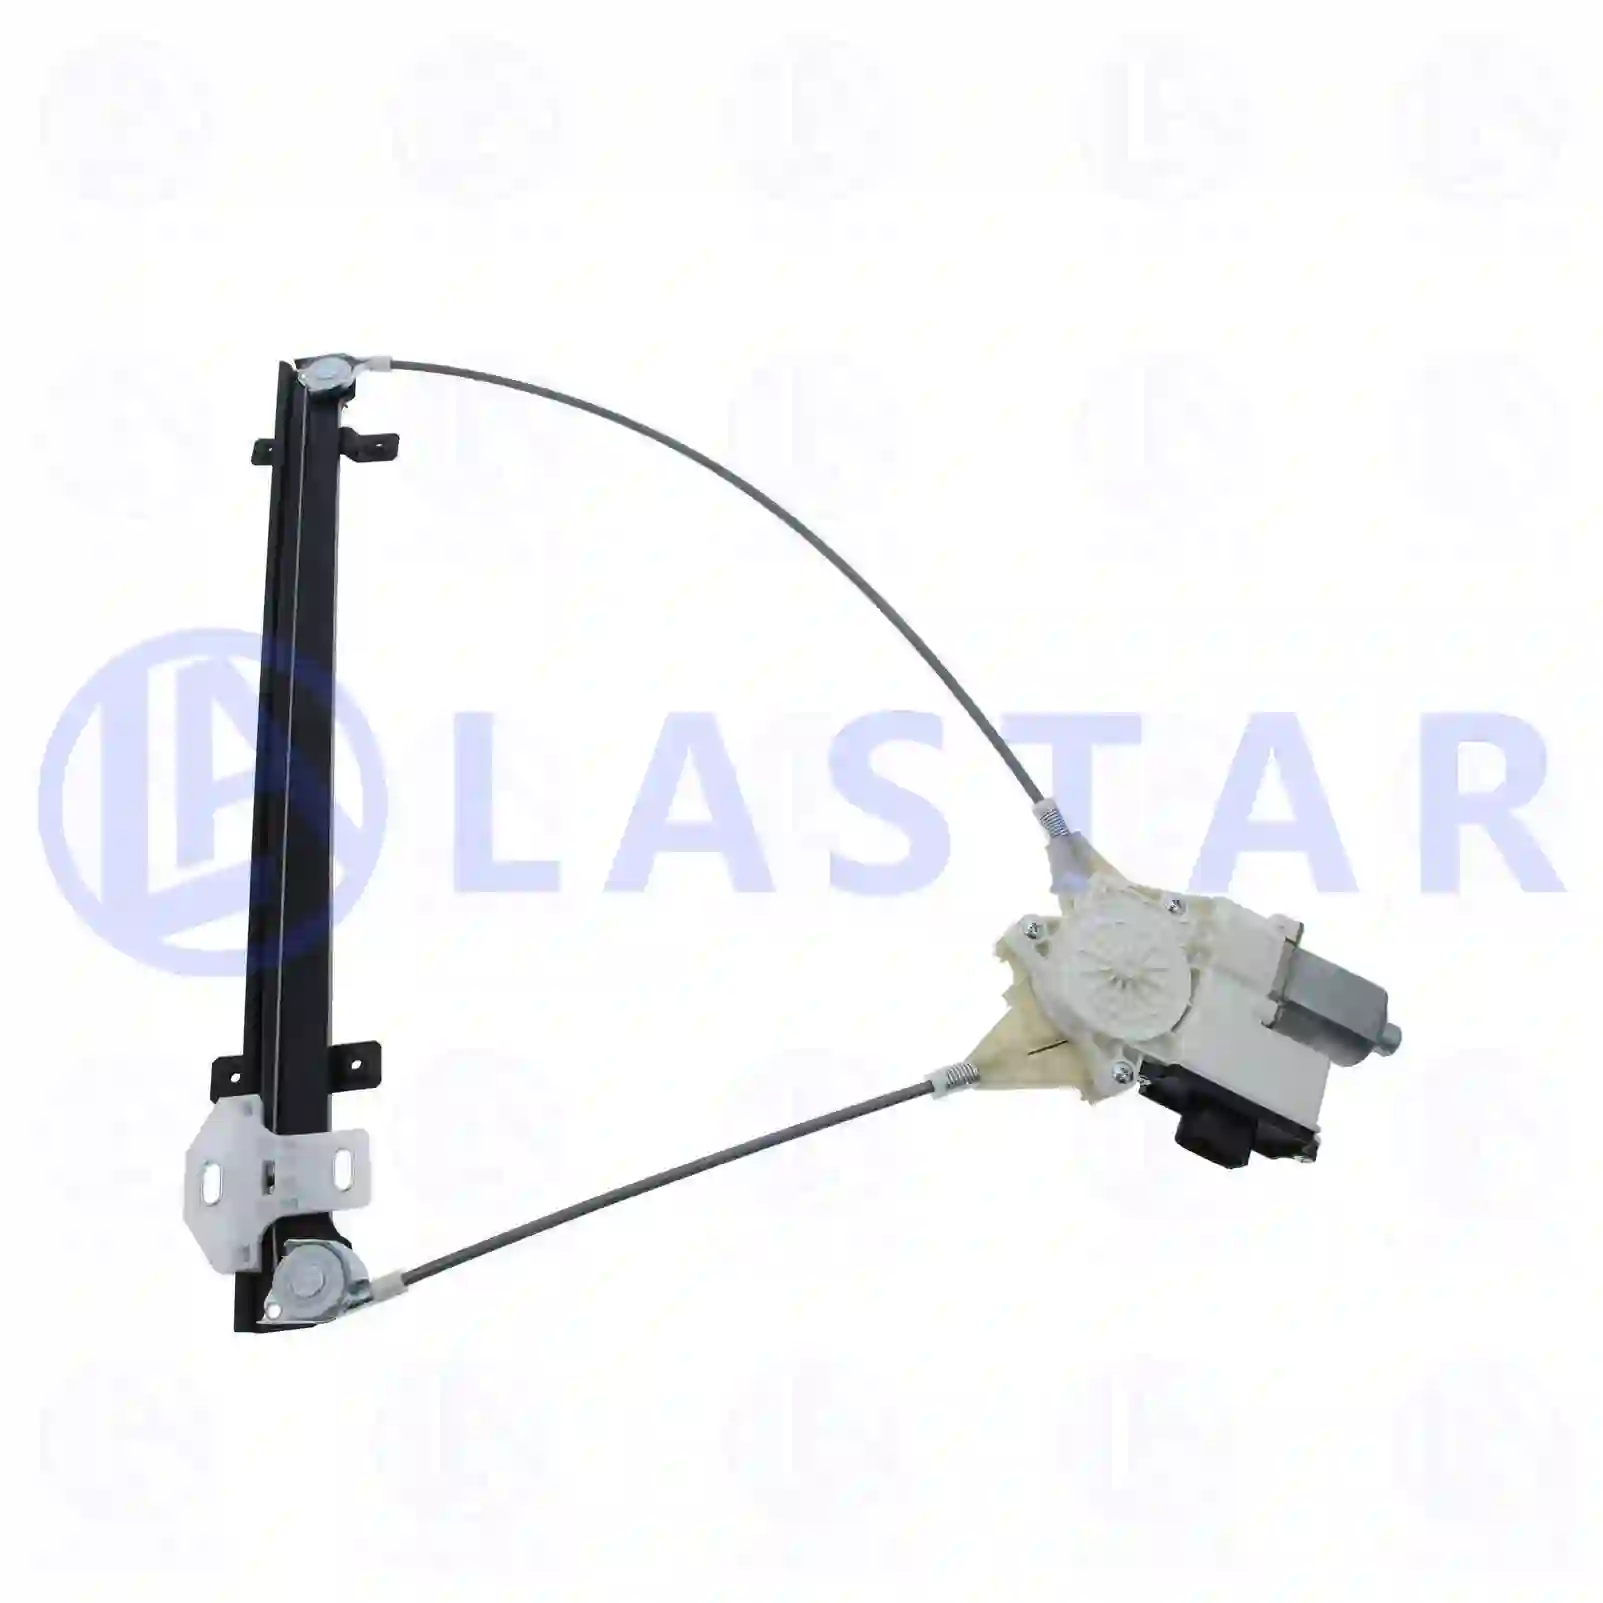 Window regulator, right, electrical, 77719930, 1779728, 2148562 ||  77719930 Lastar Spare Part | Truck Spare Parts, Auotomotive Spare Parts Window regulator, right, electrical, 77719930, 1779728, 2148562 ||  77719930 Lastar Spare Part | Truck Spare Parts, Auotomotive Spare Parts